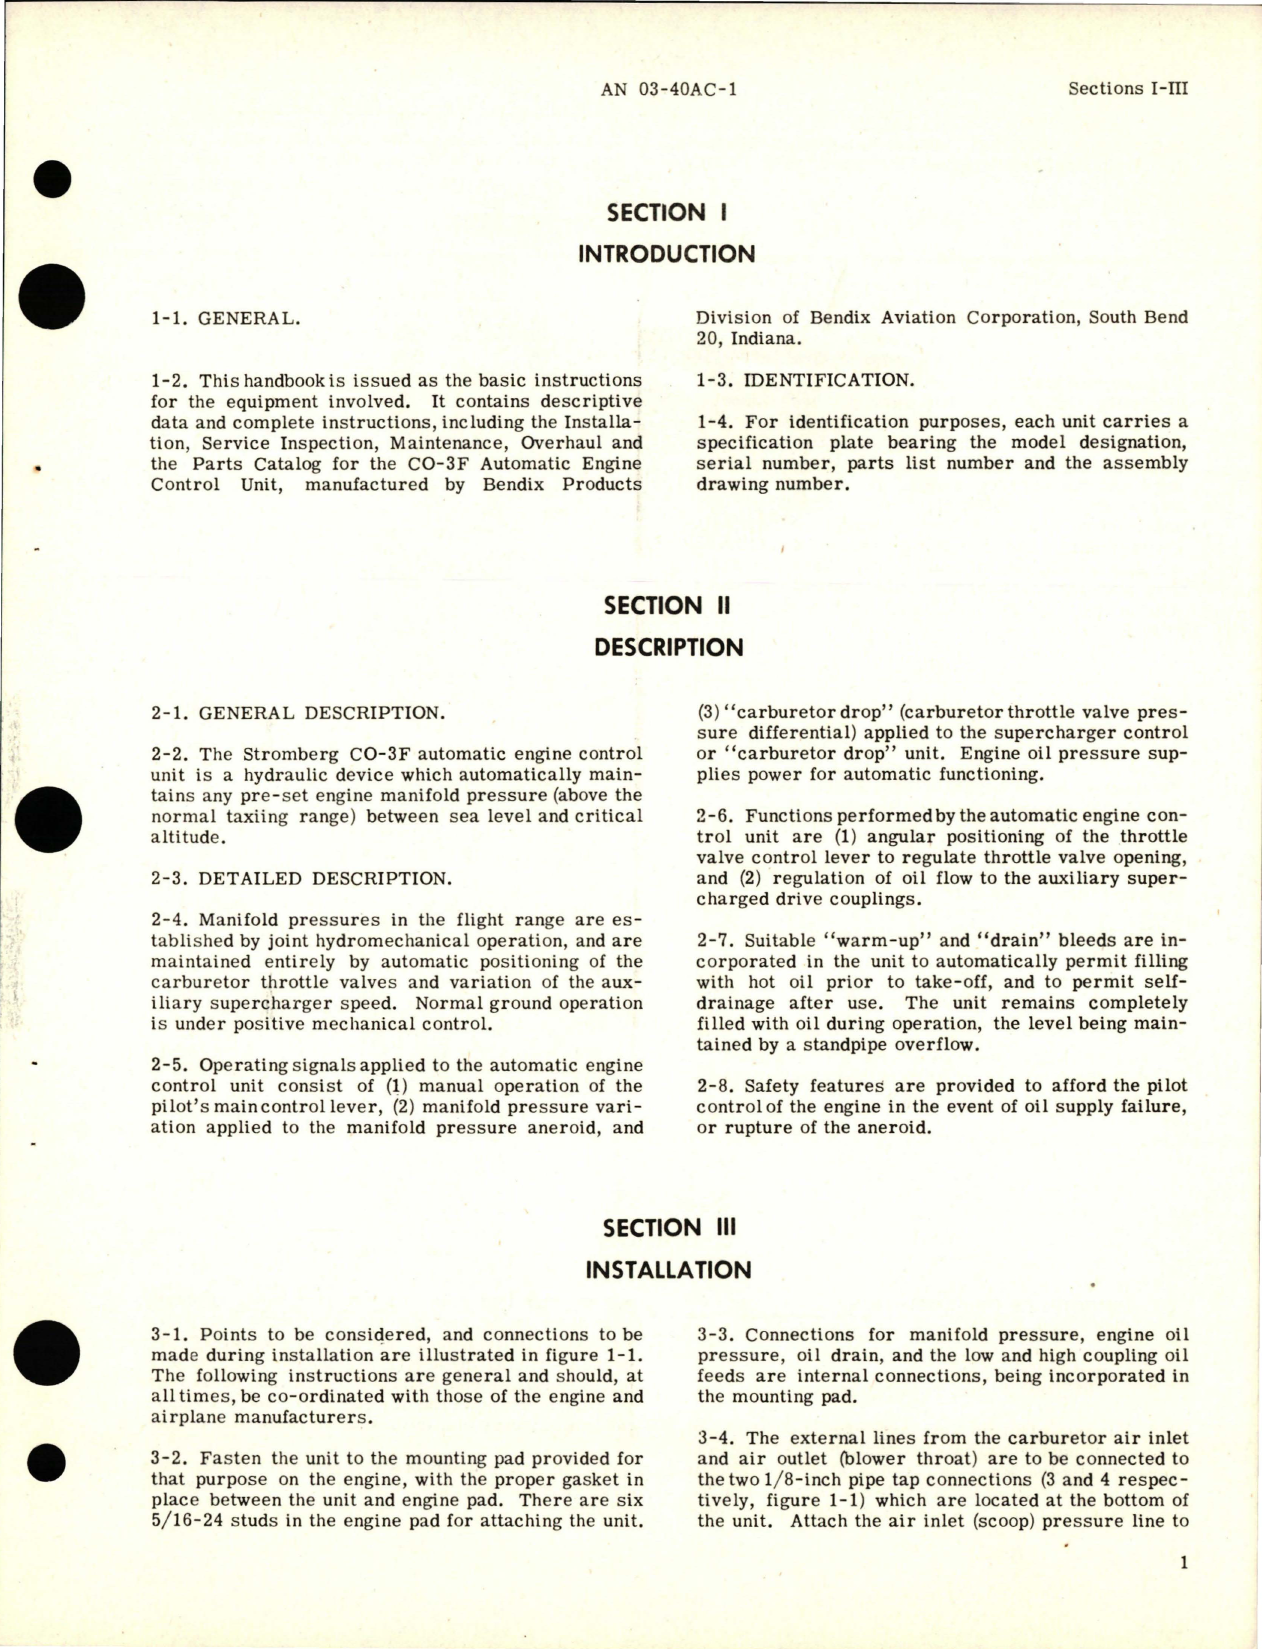 Sample page 5 from AirCorps Library document: Operation, Service and Overhaul Instructions with Parts Catalog for Automatic Engine Control - Model CO-3F